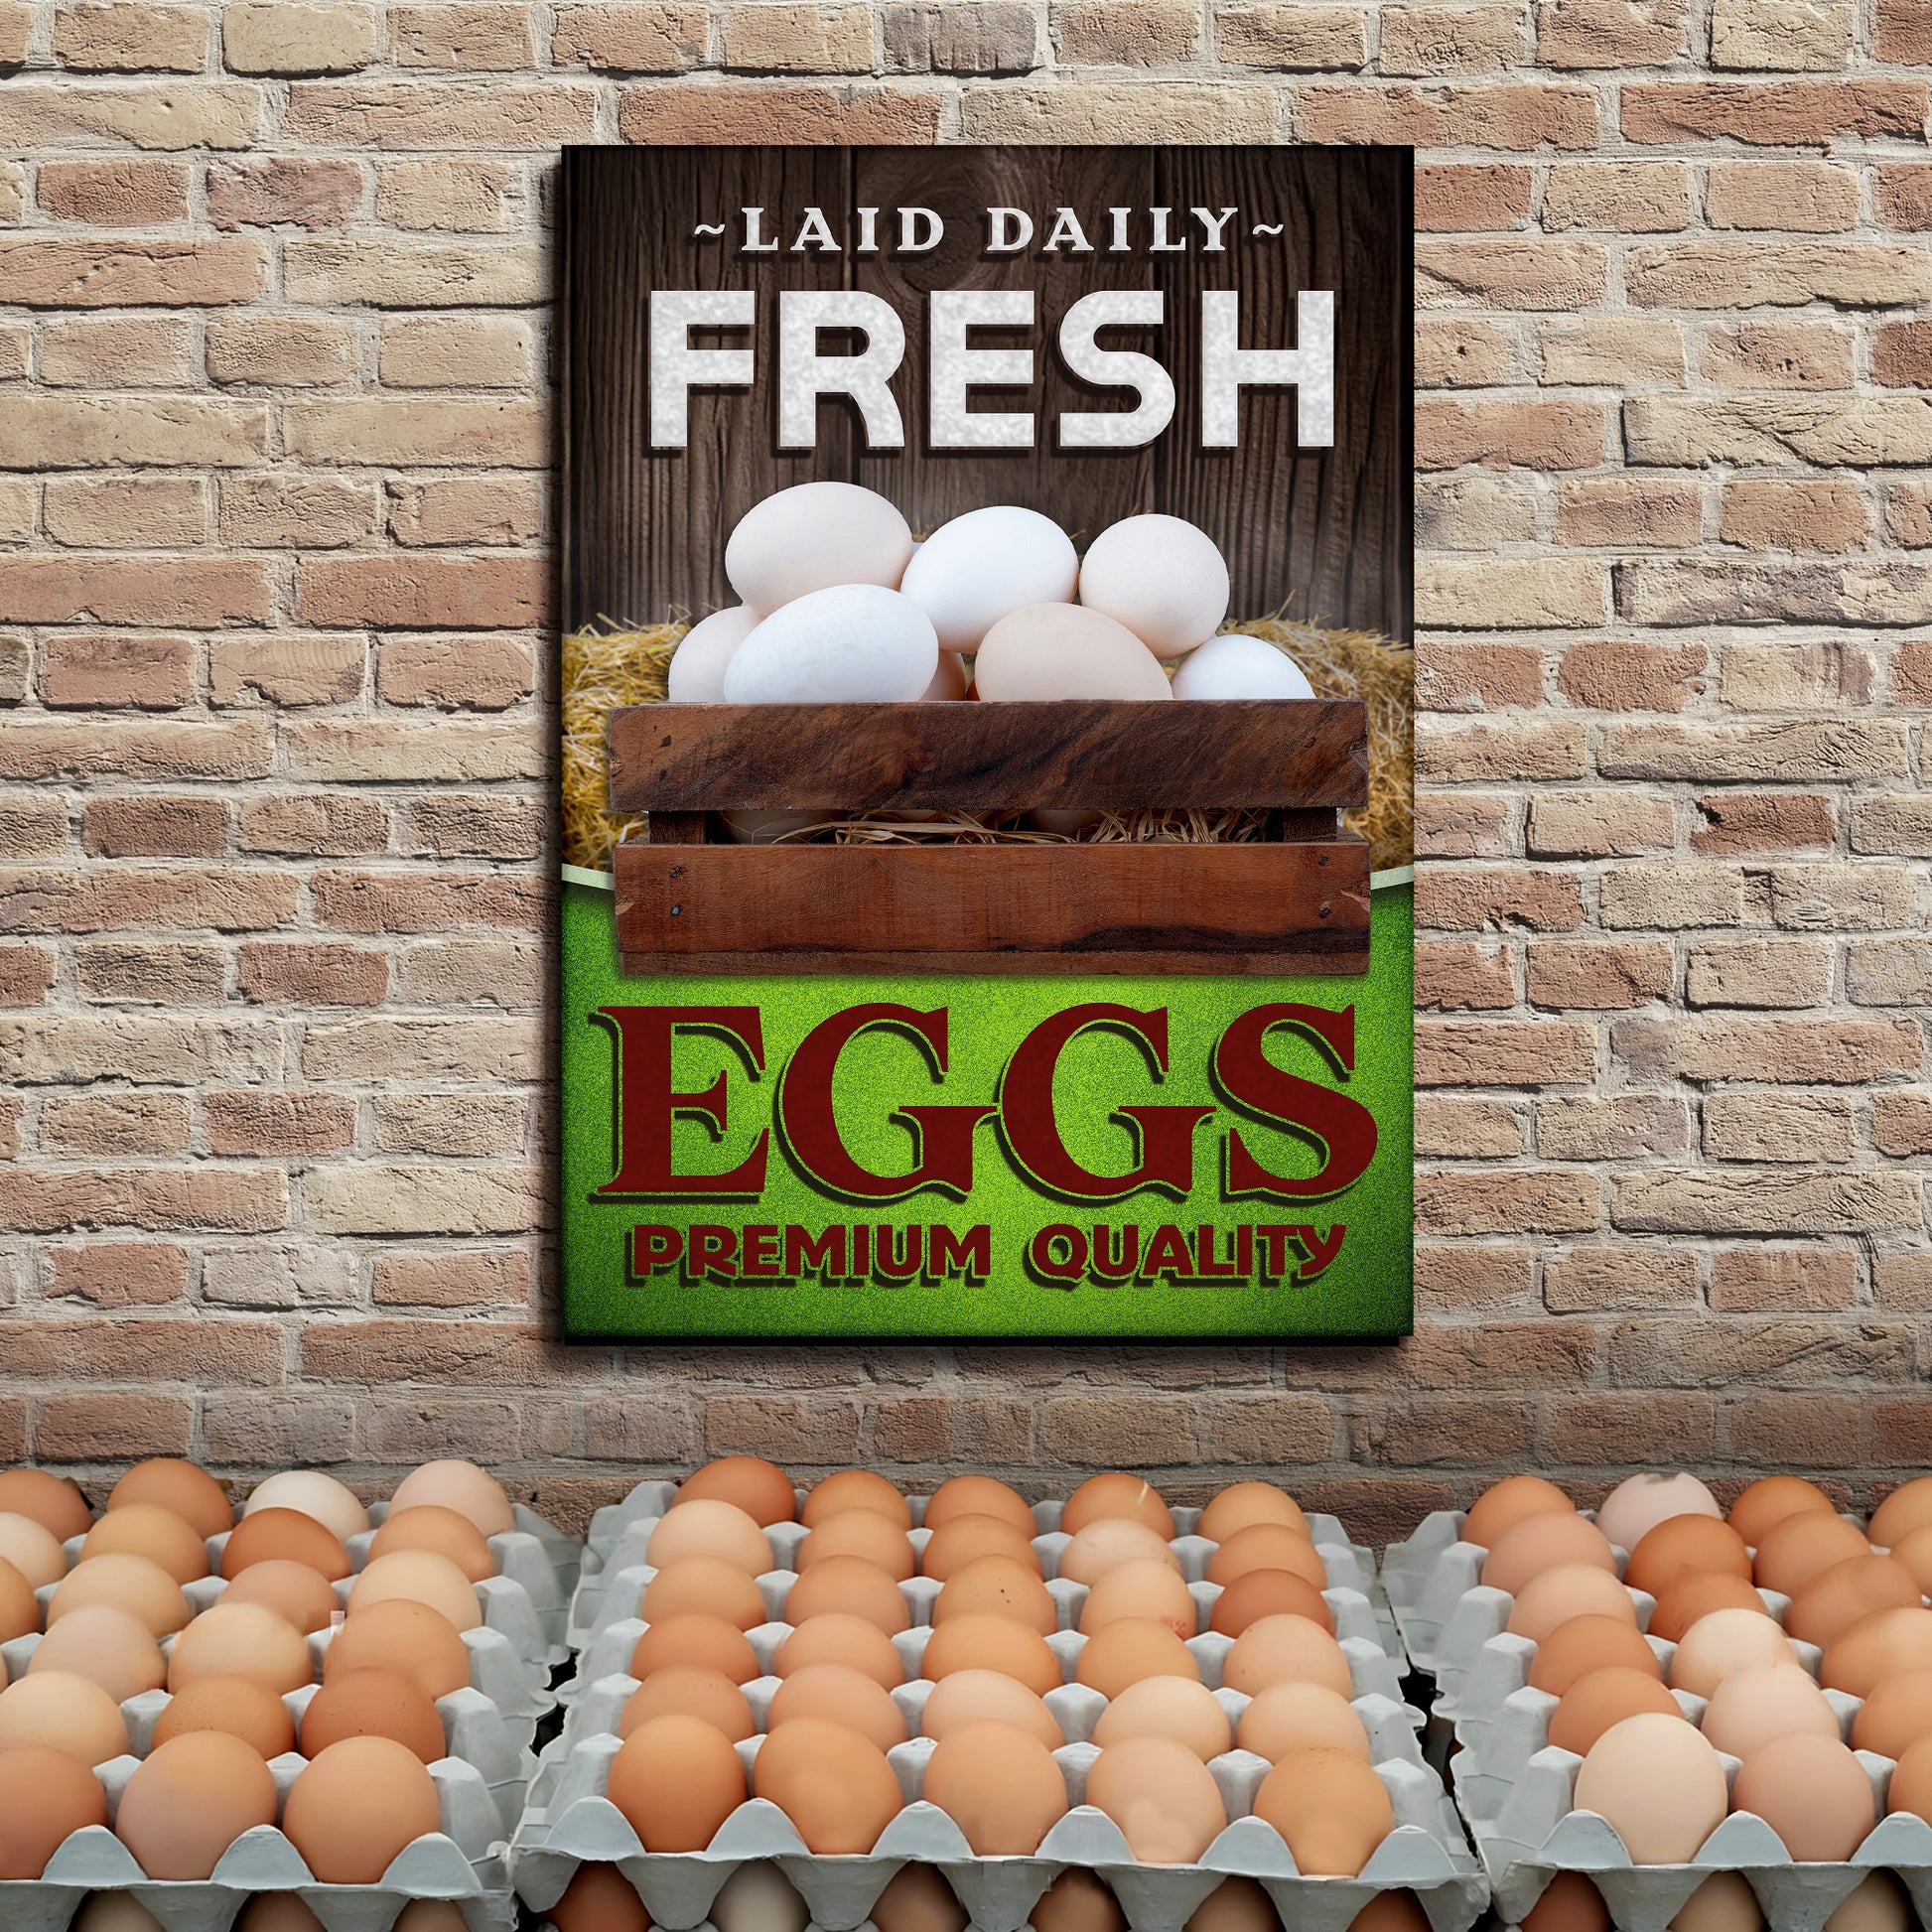 Laid Daily Farm Fresh Eggs Sign Style 1 - Image by Tailored Canvases